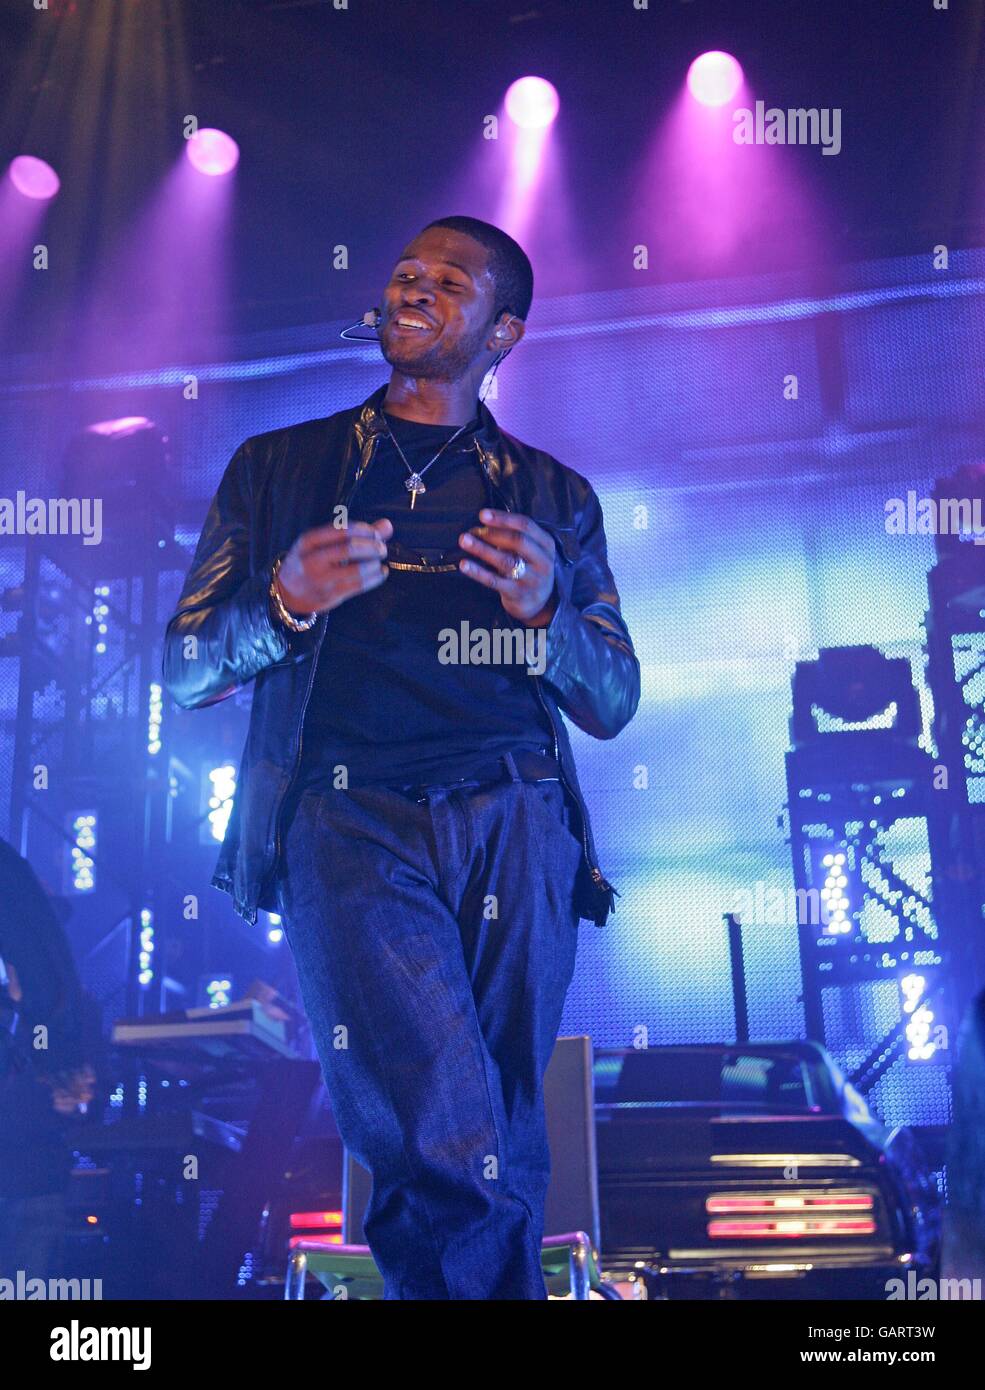 Usher performs an exclusive Sony Ericsson gig at the Indig02 at the O2 Arena in Greenwich, London. Stock Photo